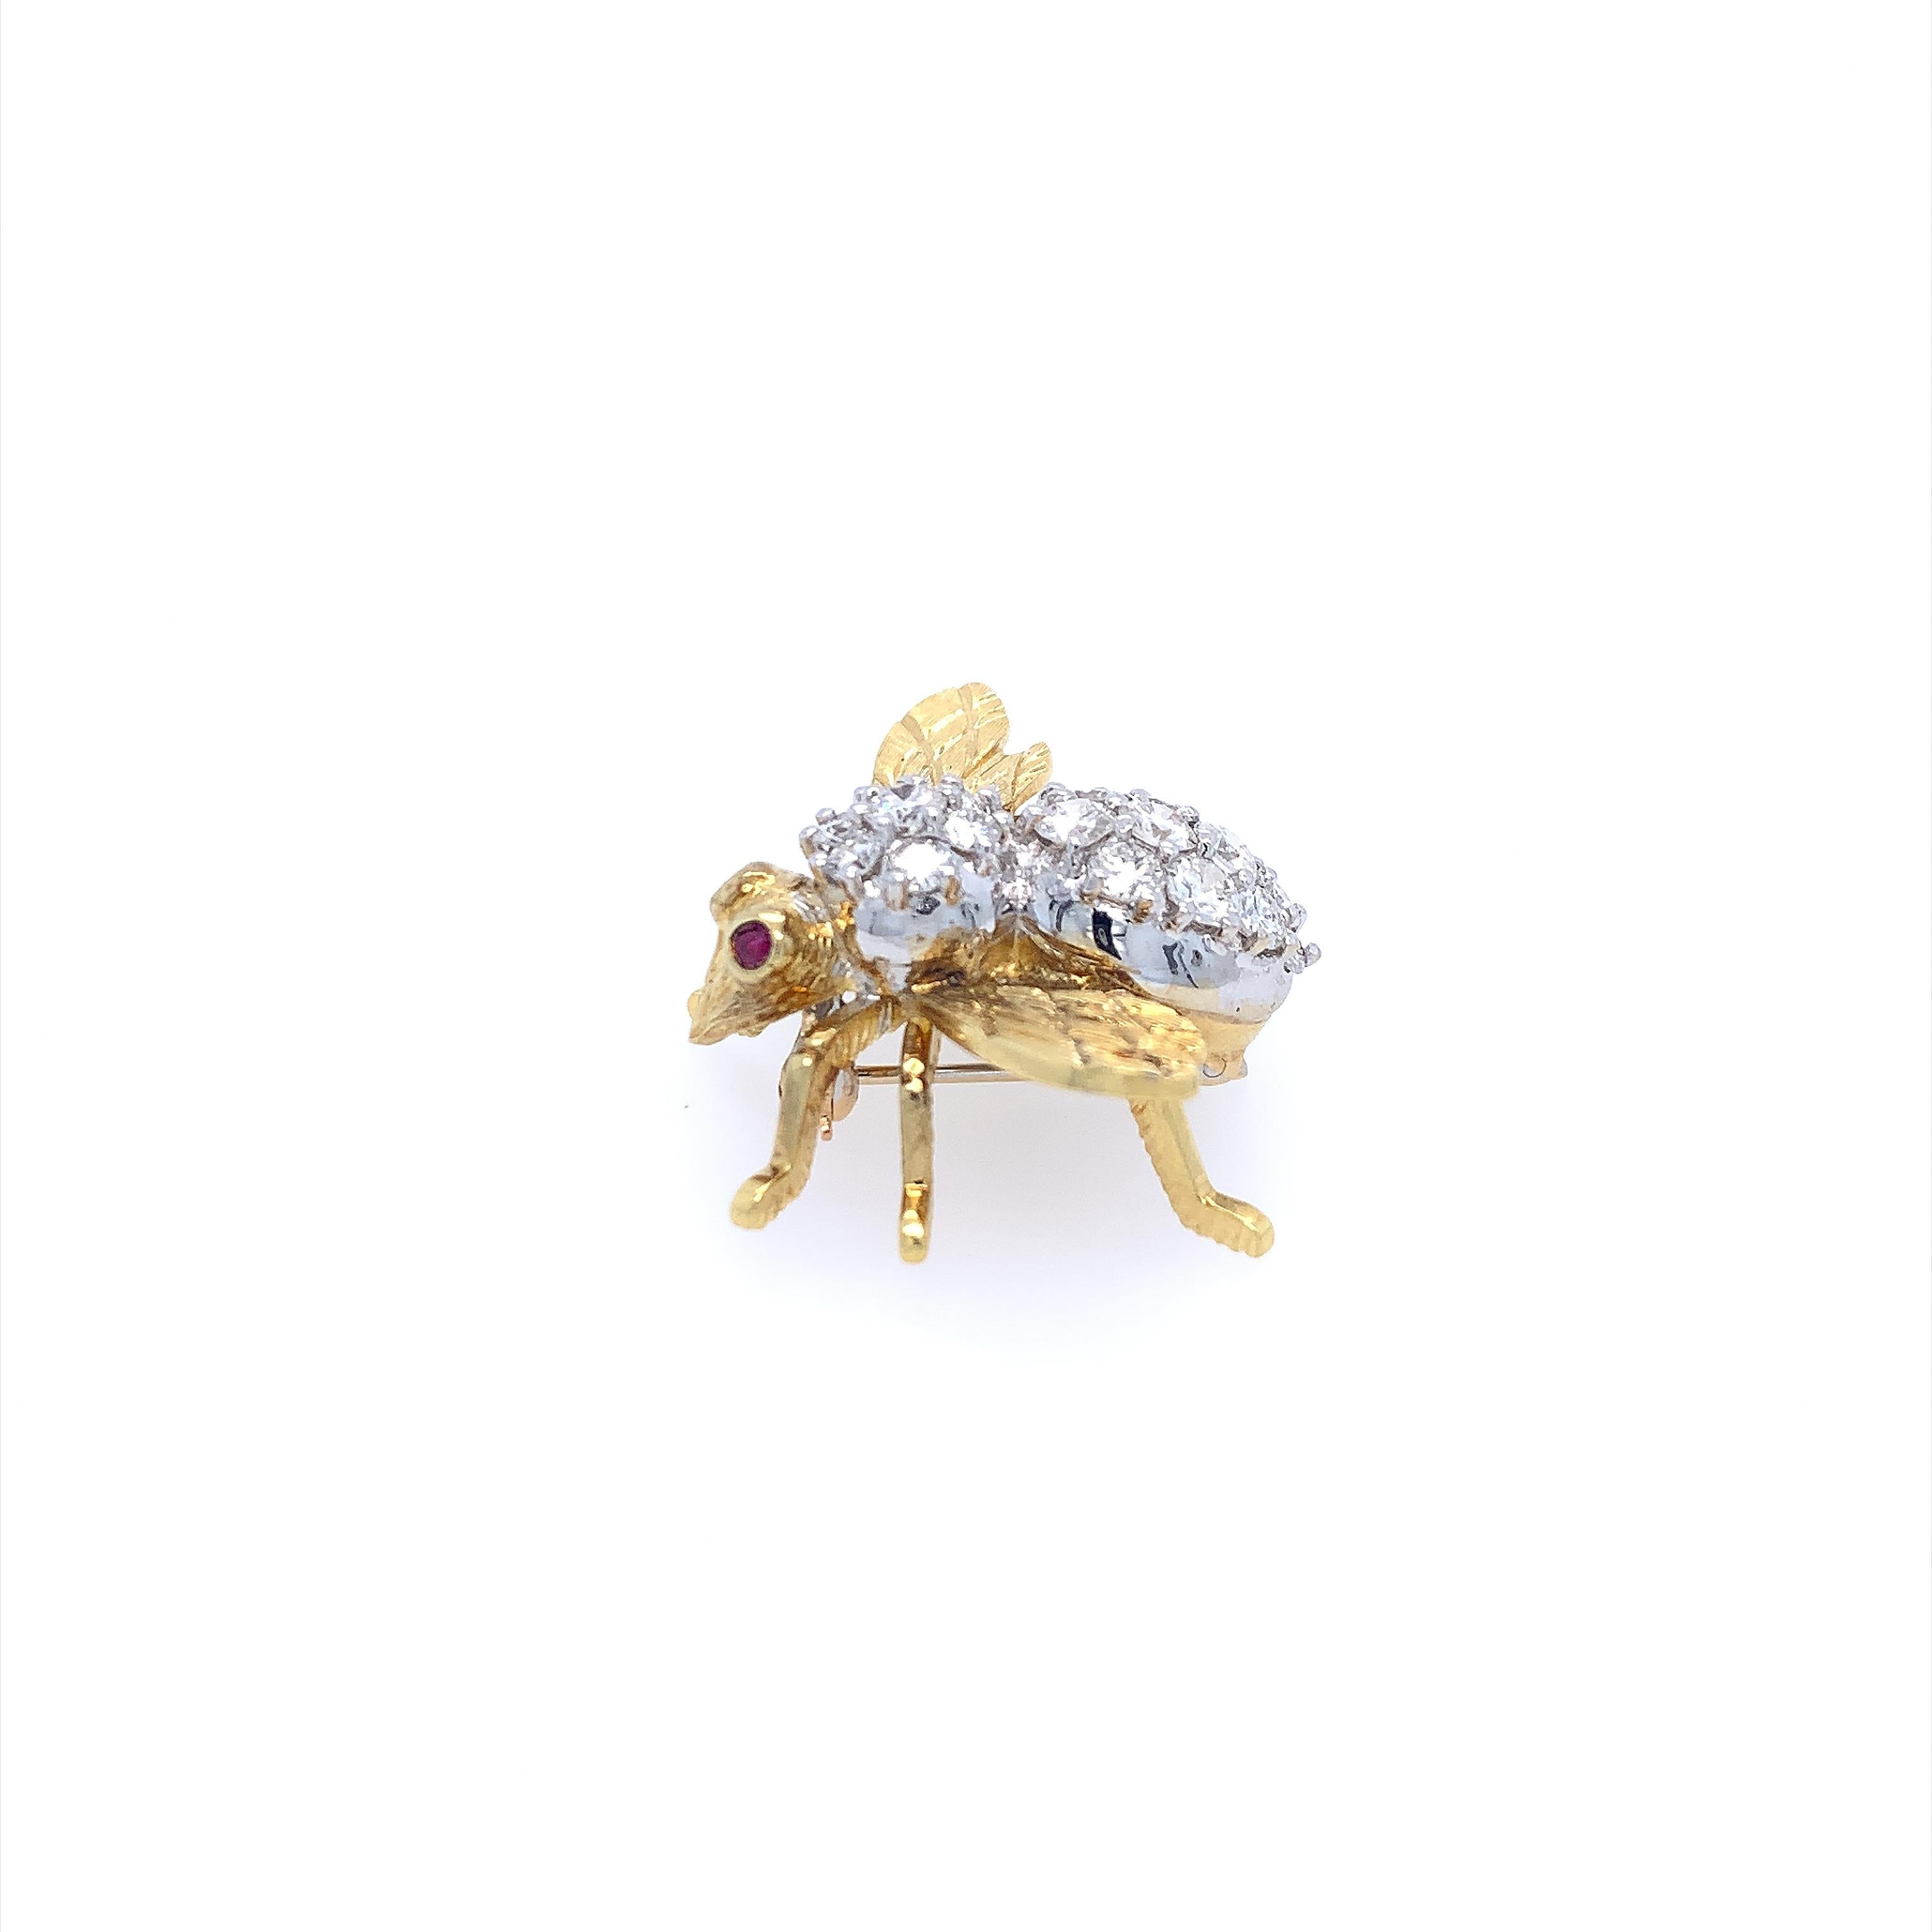 A magnificent Herbert Rosenthal Bee Brooch featuring 2.00 carats of diamonds embellished with bezel set ruby eyes. This 18K yellow and white gold brooch pin features a 3D life-like bee with a pin closure. Its body is encrusted with (19) nineteen